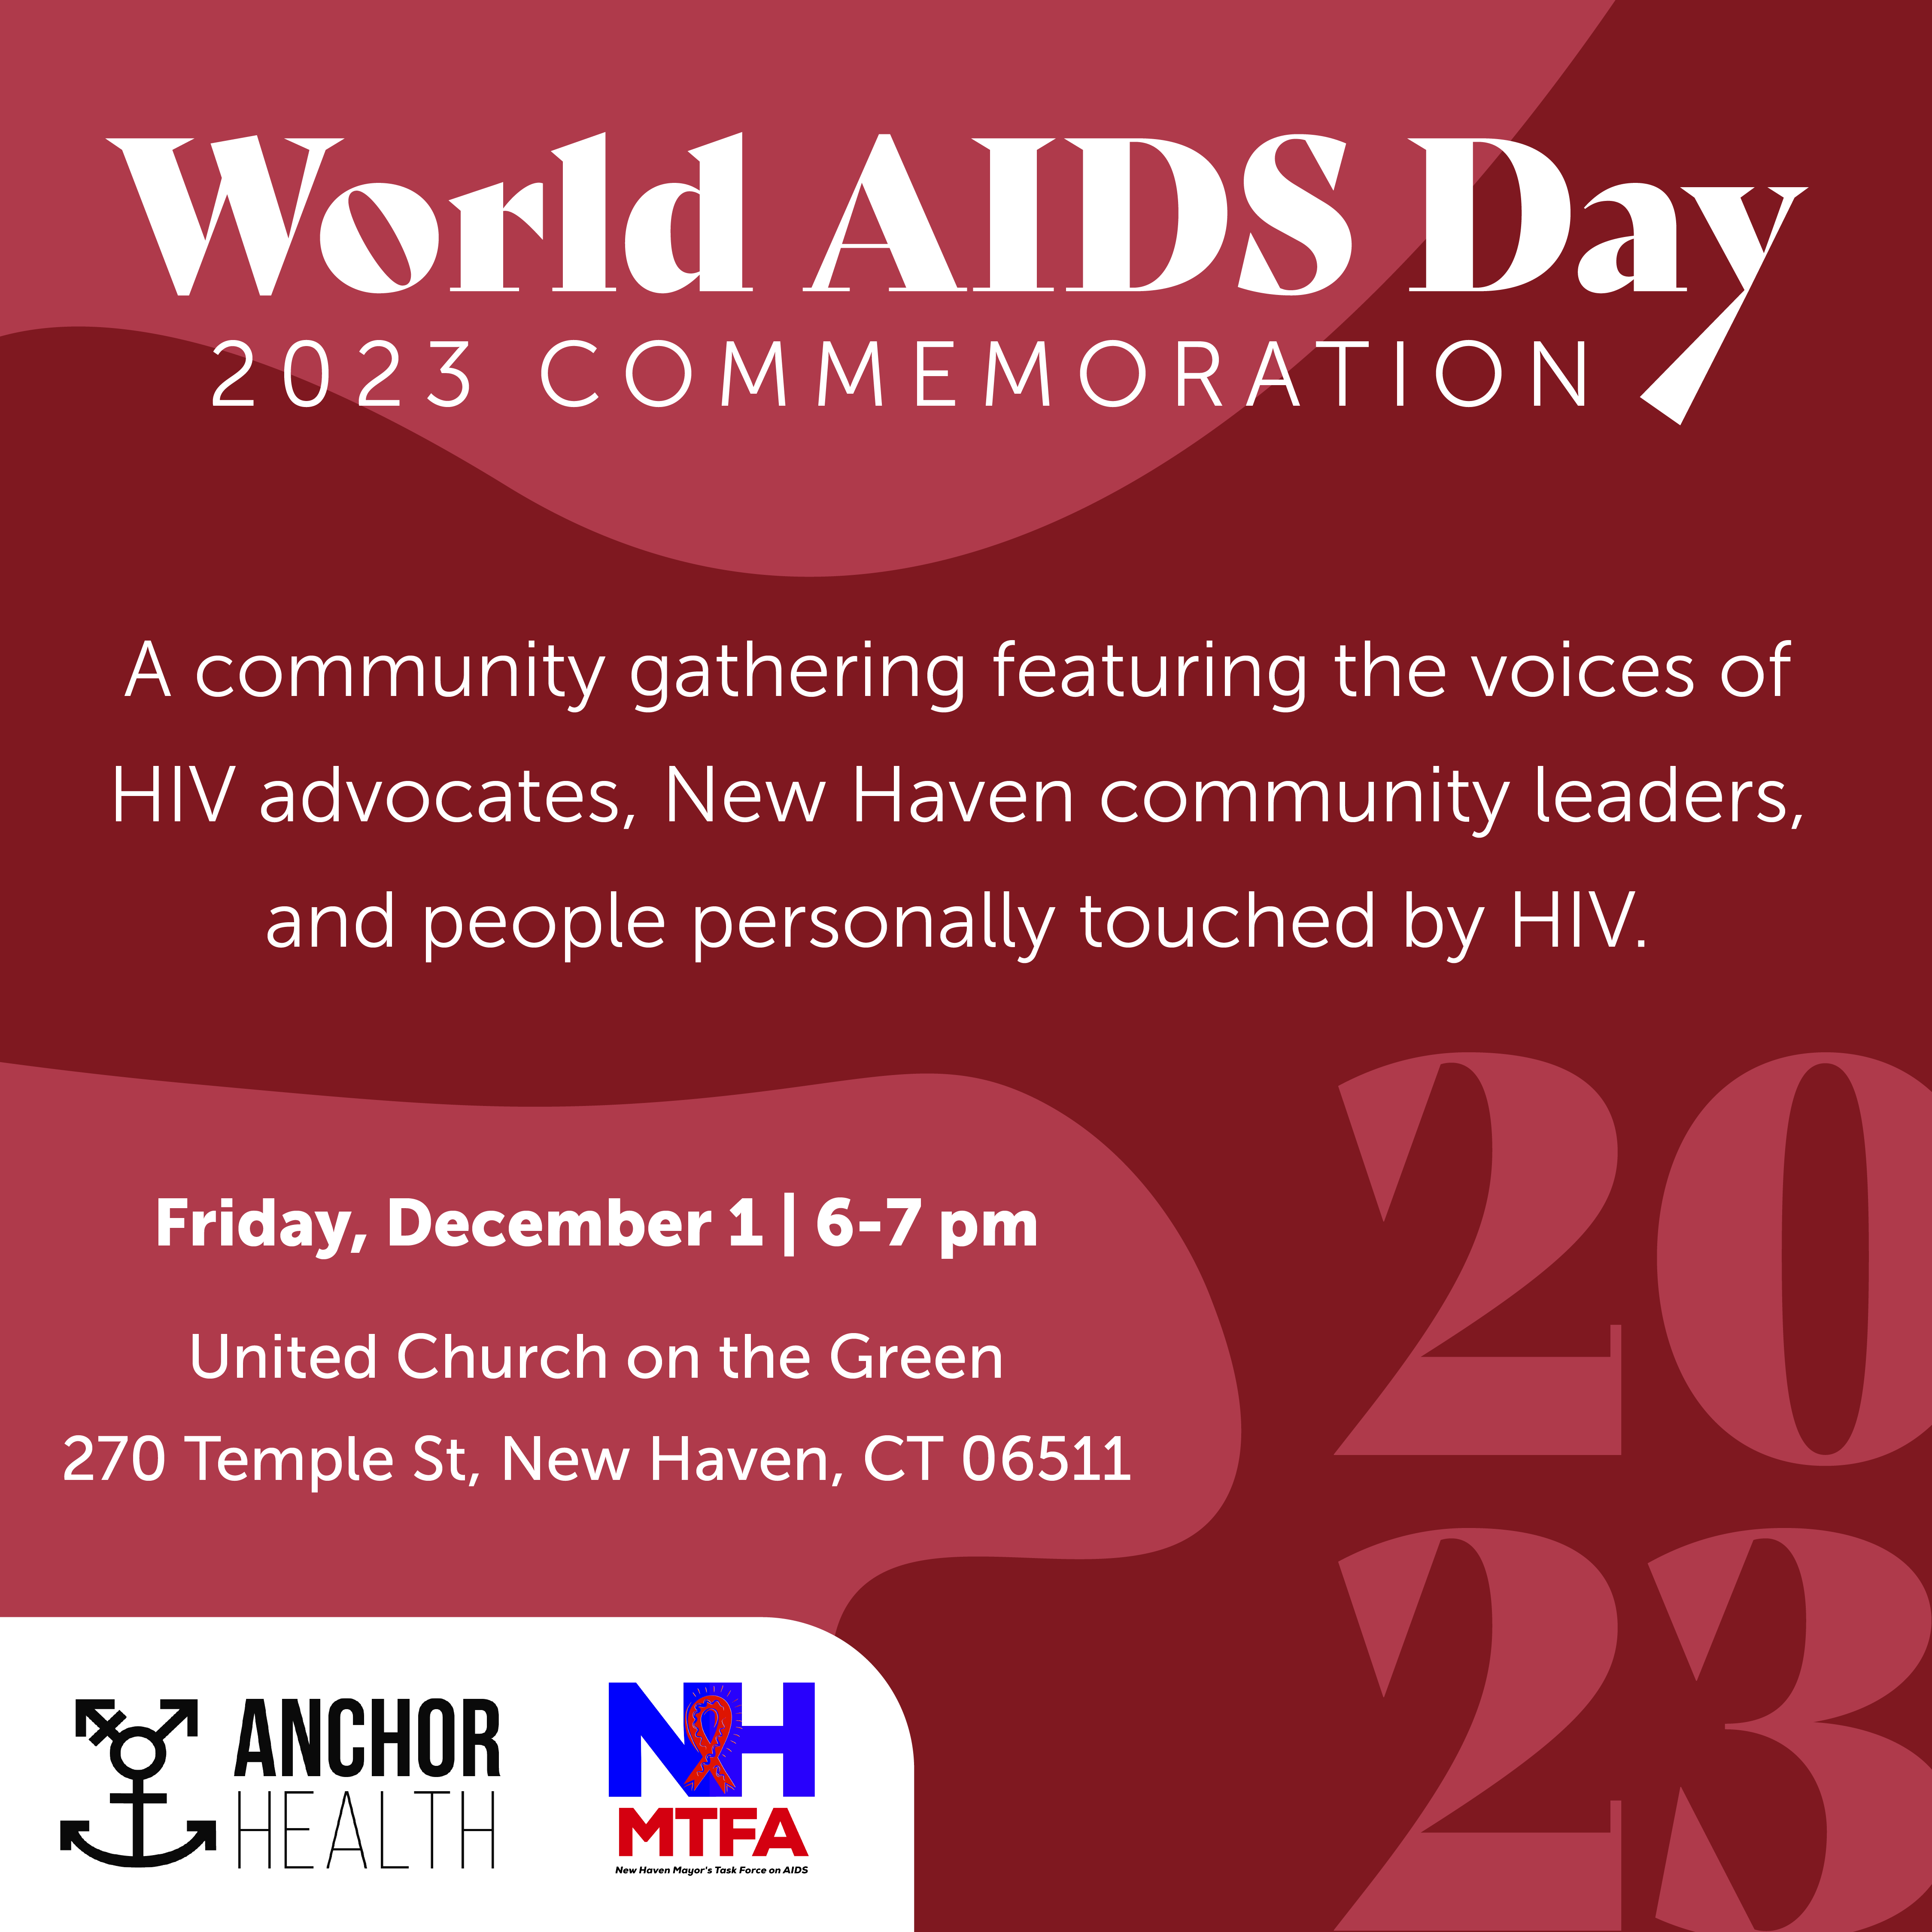 World AIDS Day 2023 Commemoration